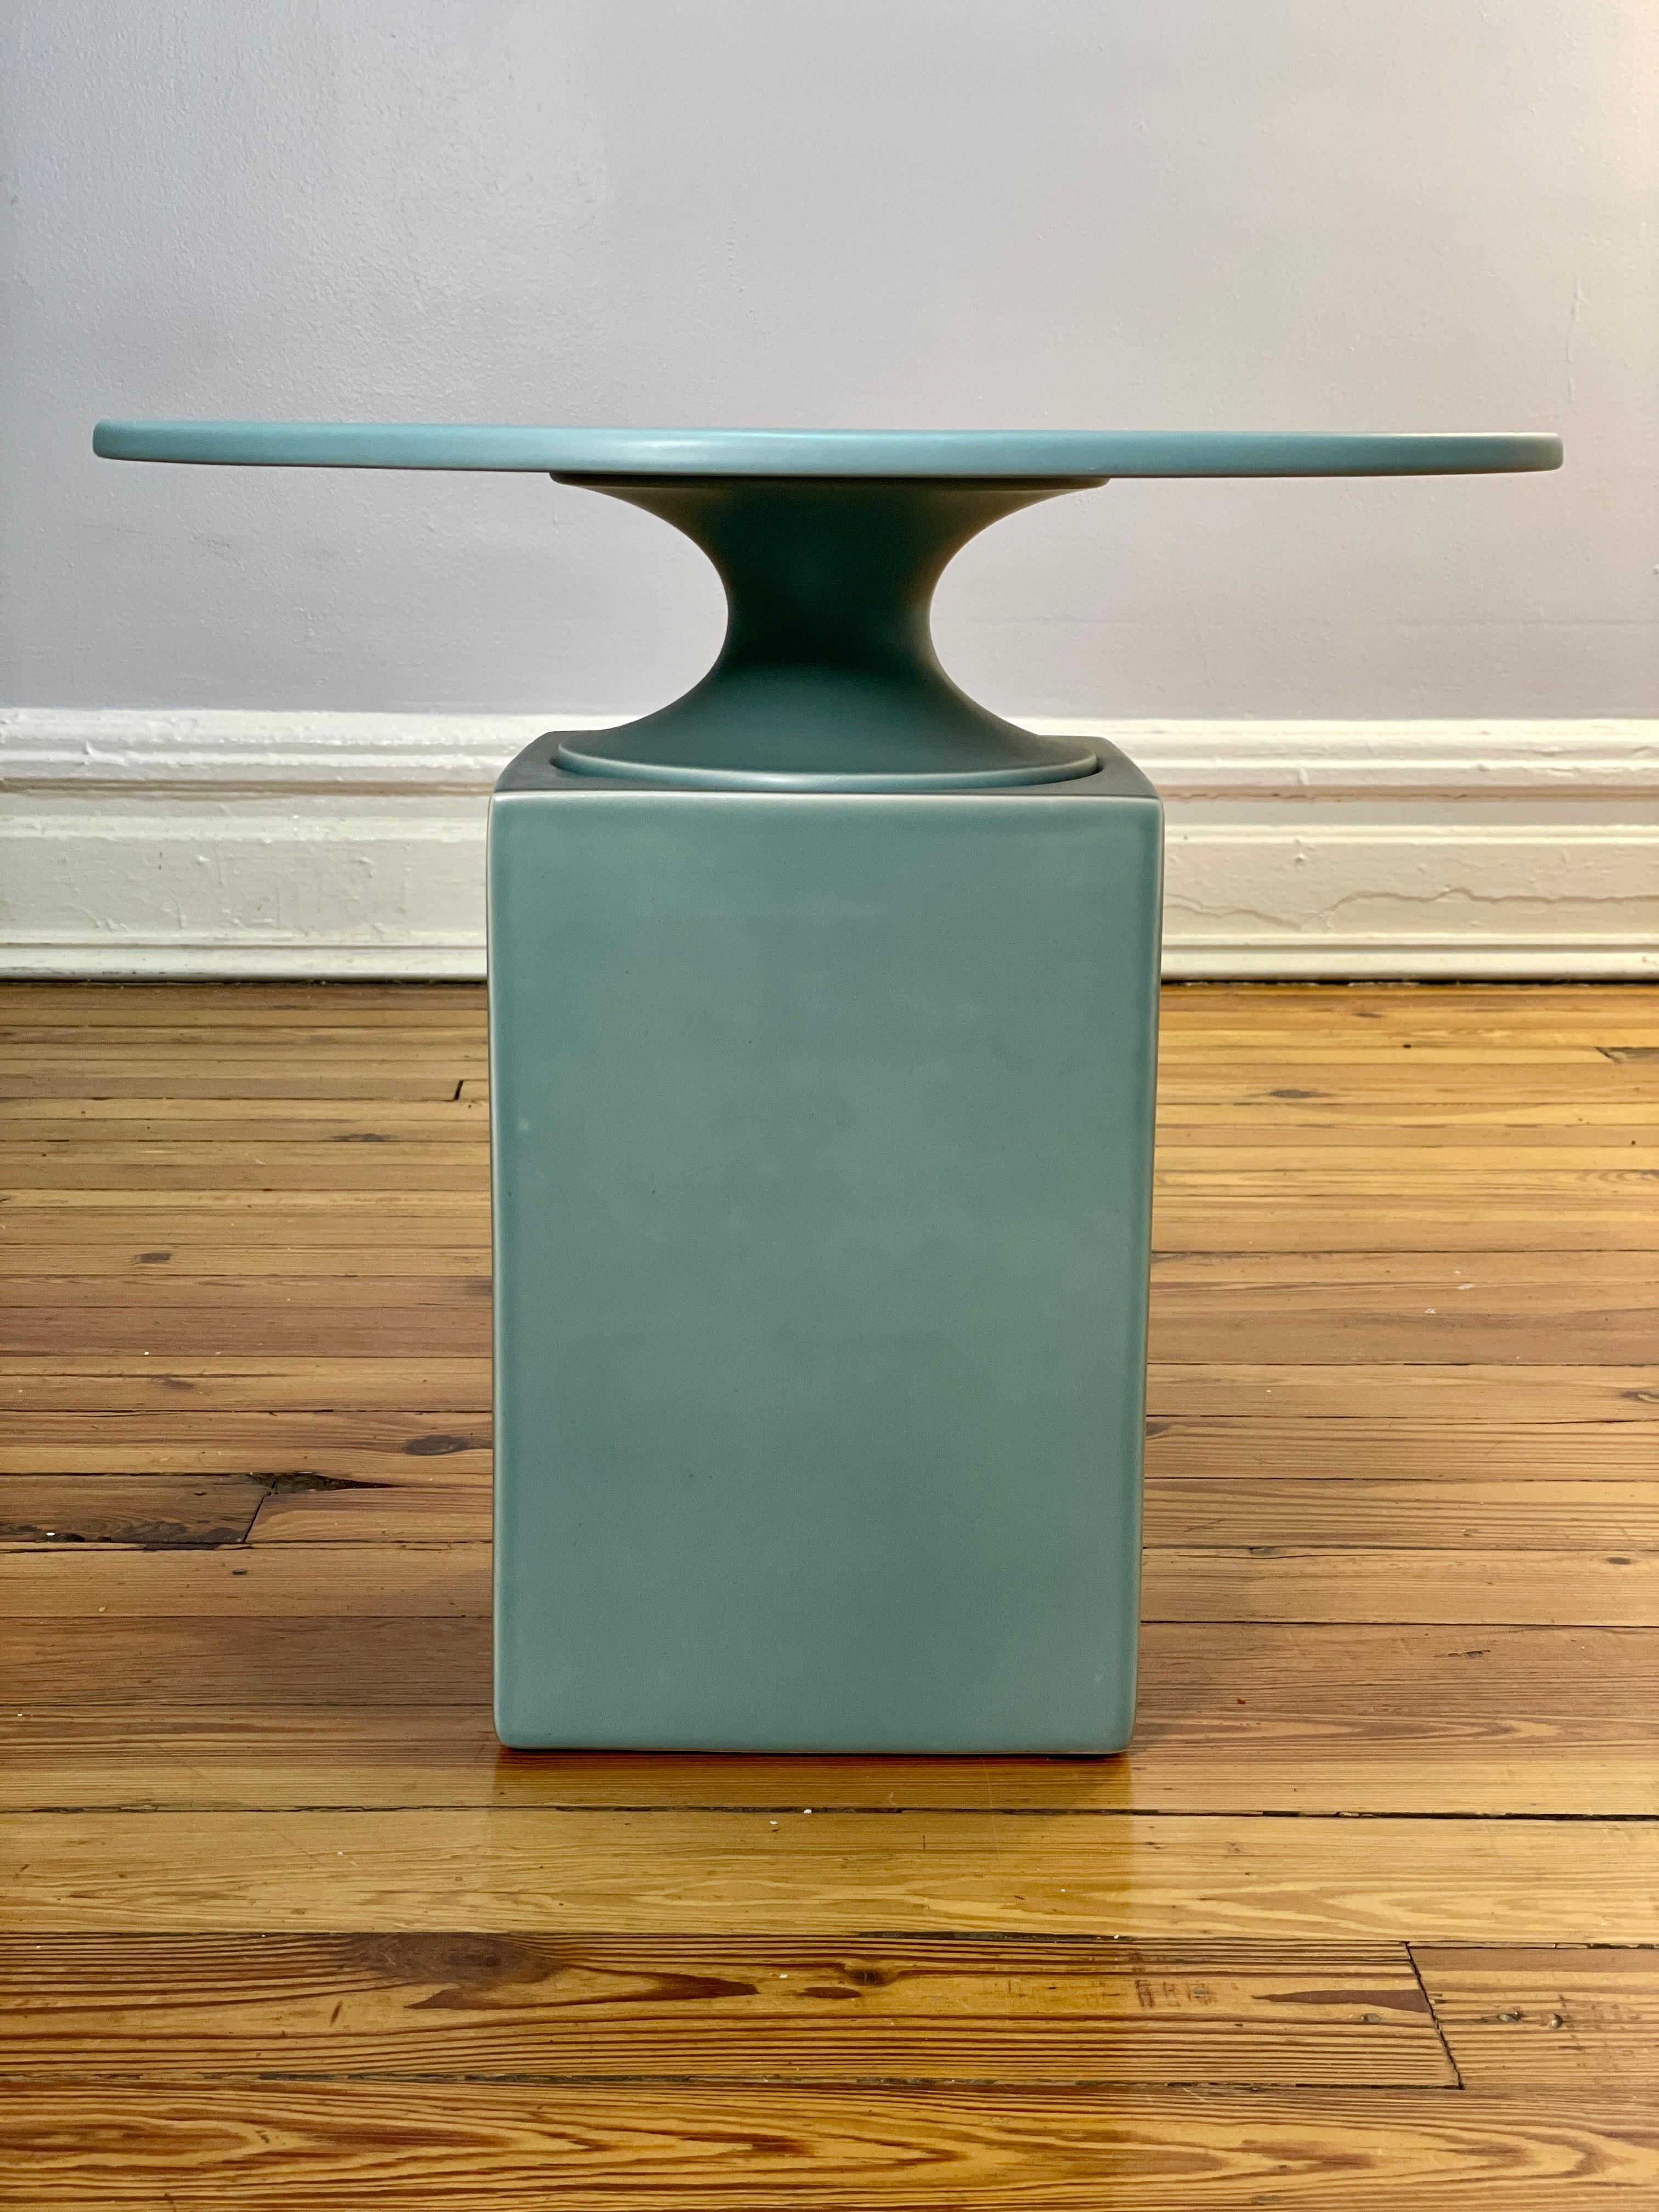 This contemporary side table is part of the Delcourt Collection. Edited by Christophe Delcourt and designed by Vincent Dupont-Rougier.  this OUK side table is in ceramic and beautifully glazed with a nice blue tone. Its design resembles a pedestal